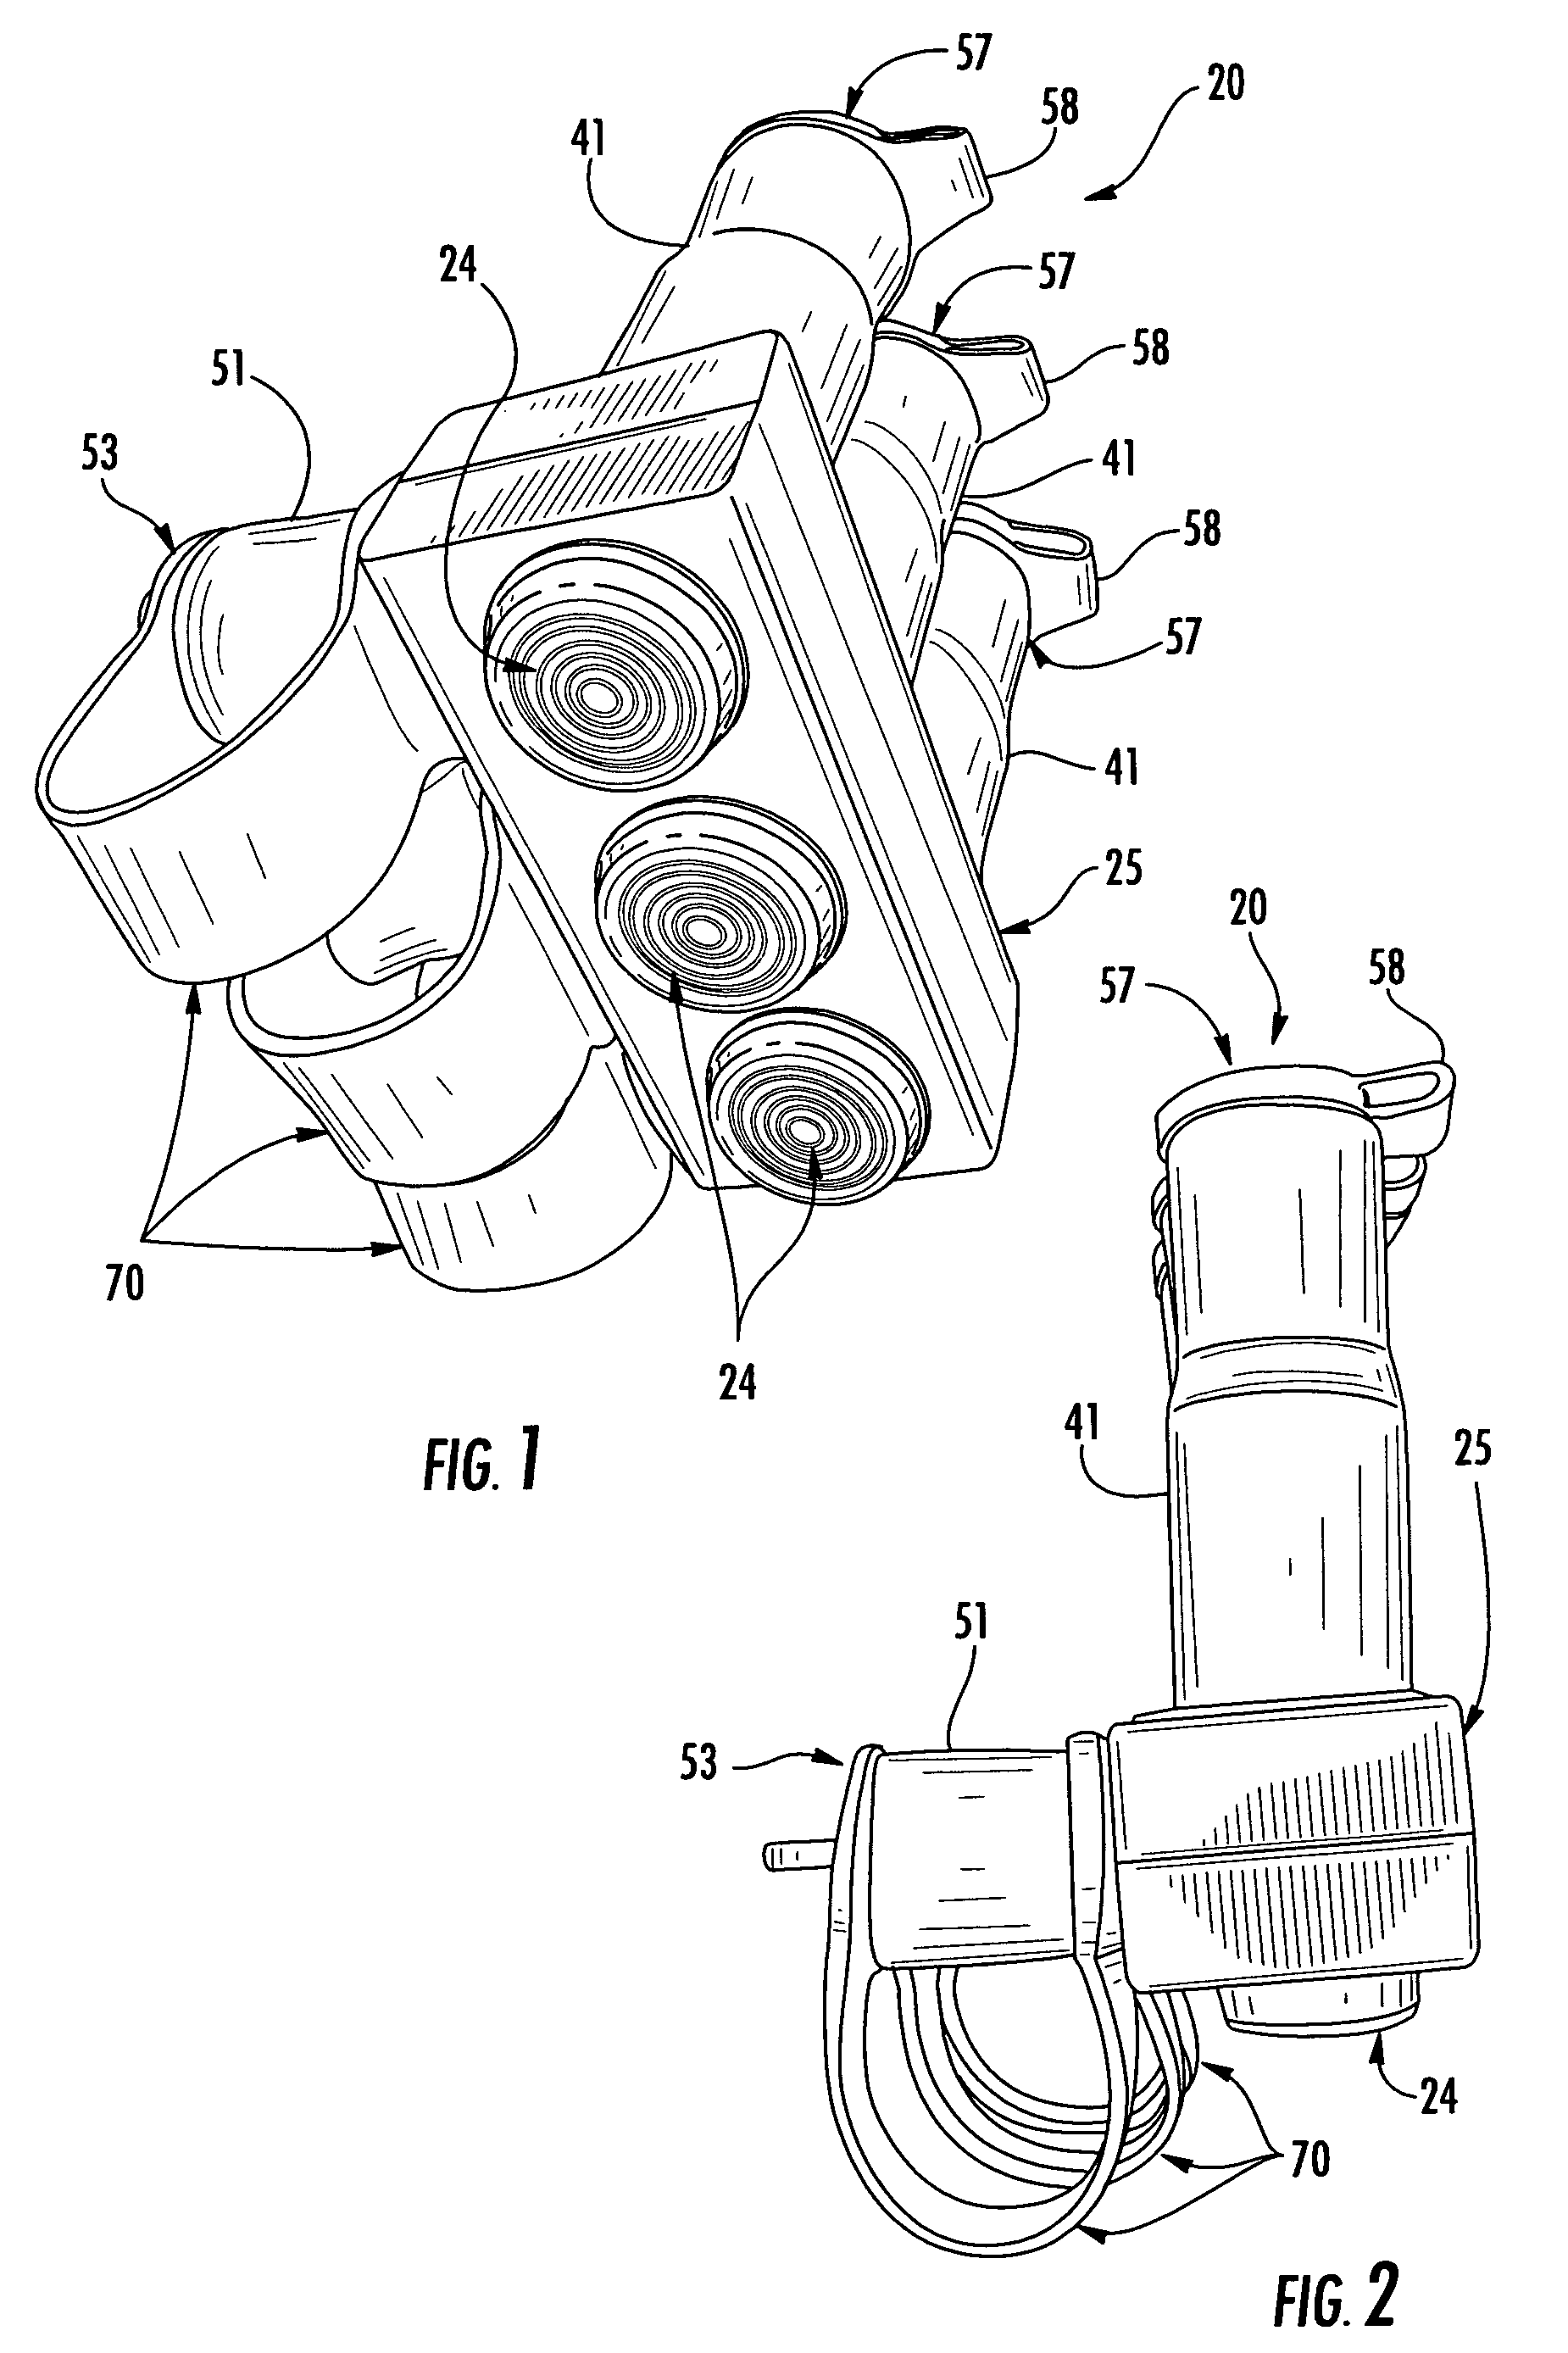 Electrical connector including insulating boots and associated methods